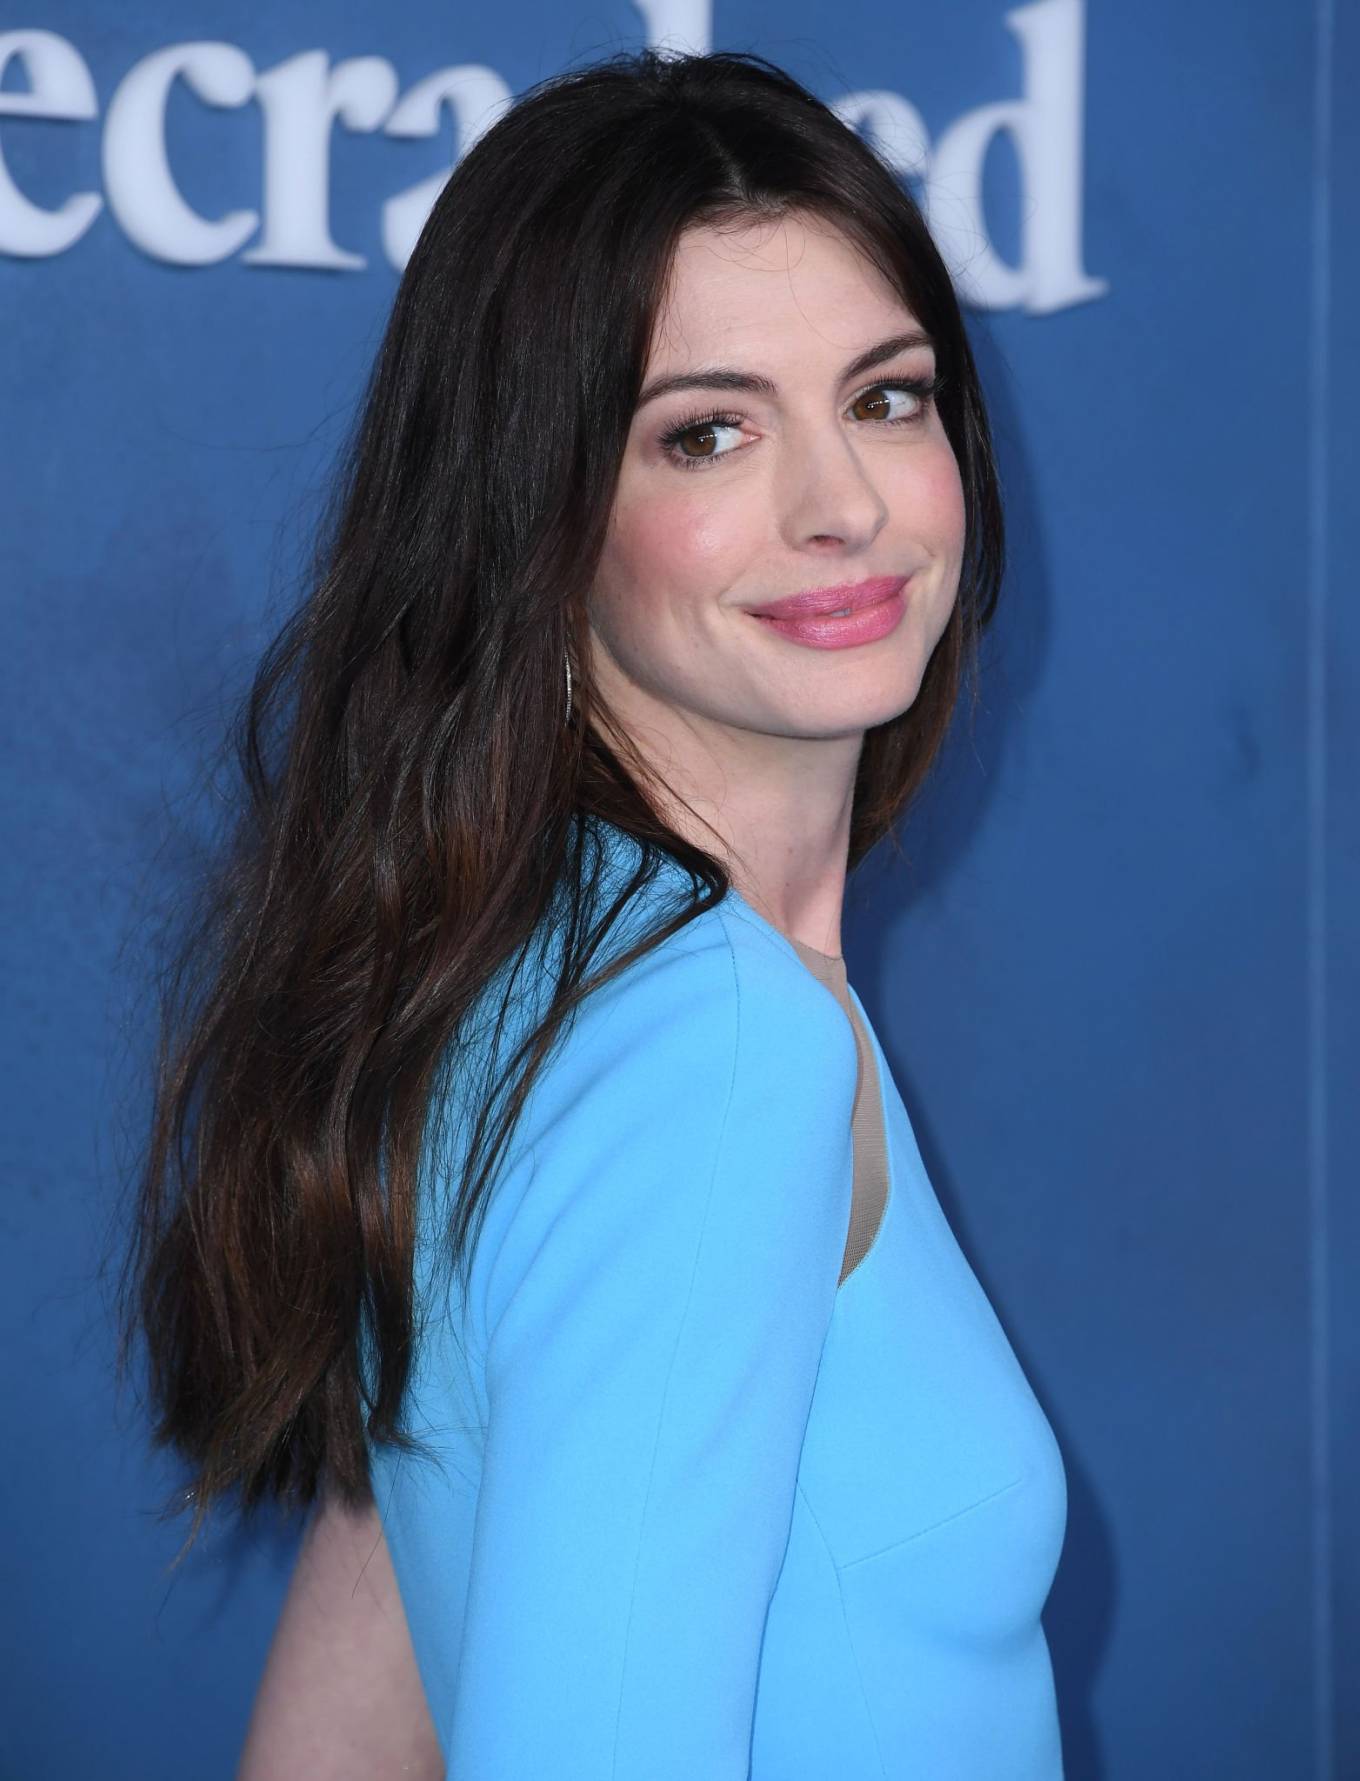 Anne Hathaway Picture at WeCrashed premiere at Academy Museum of